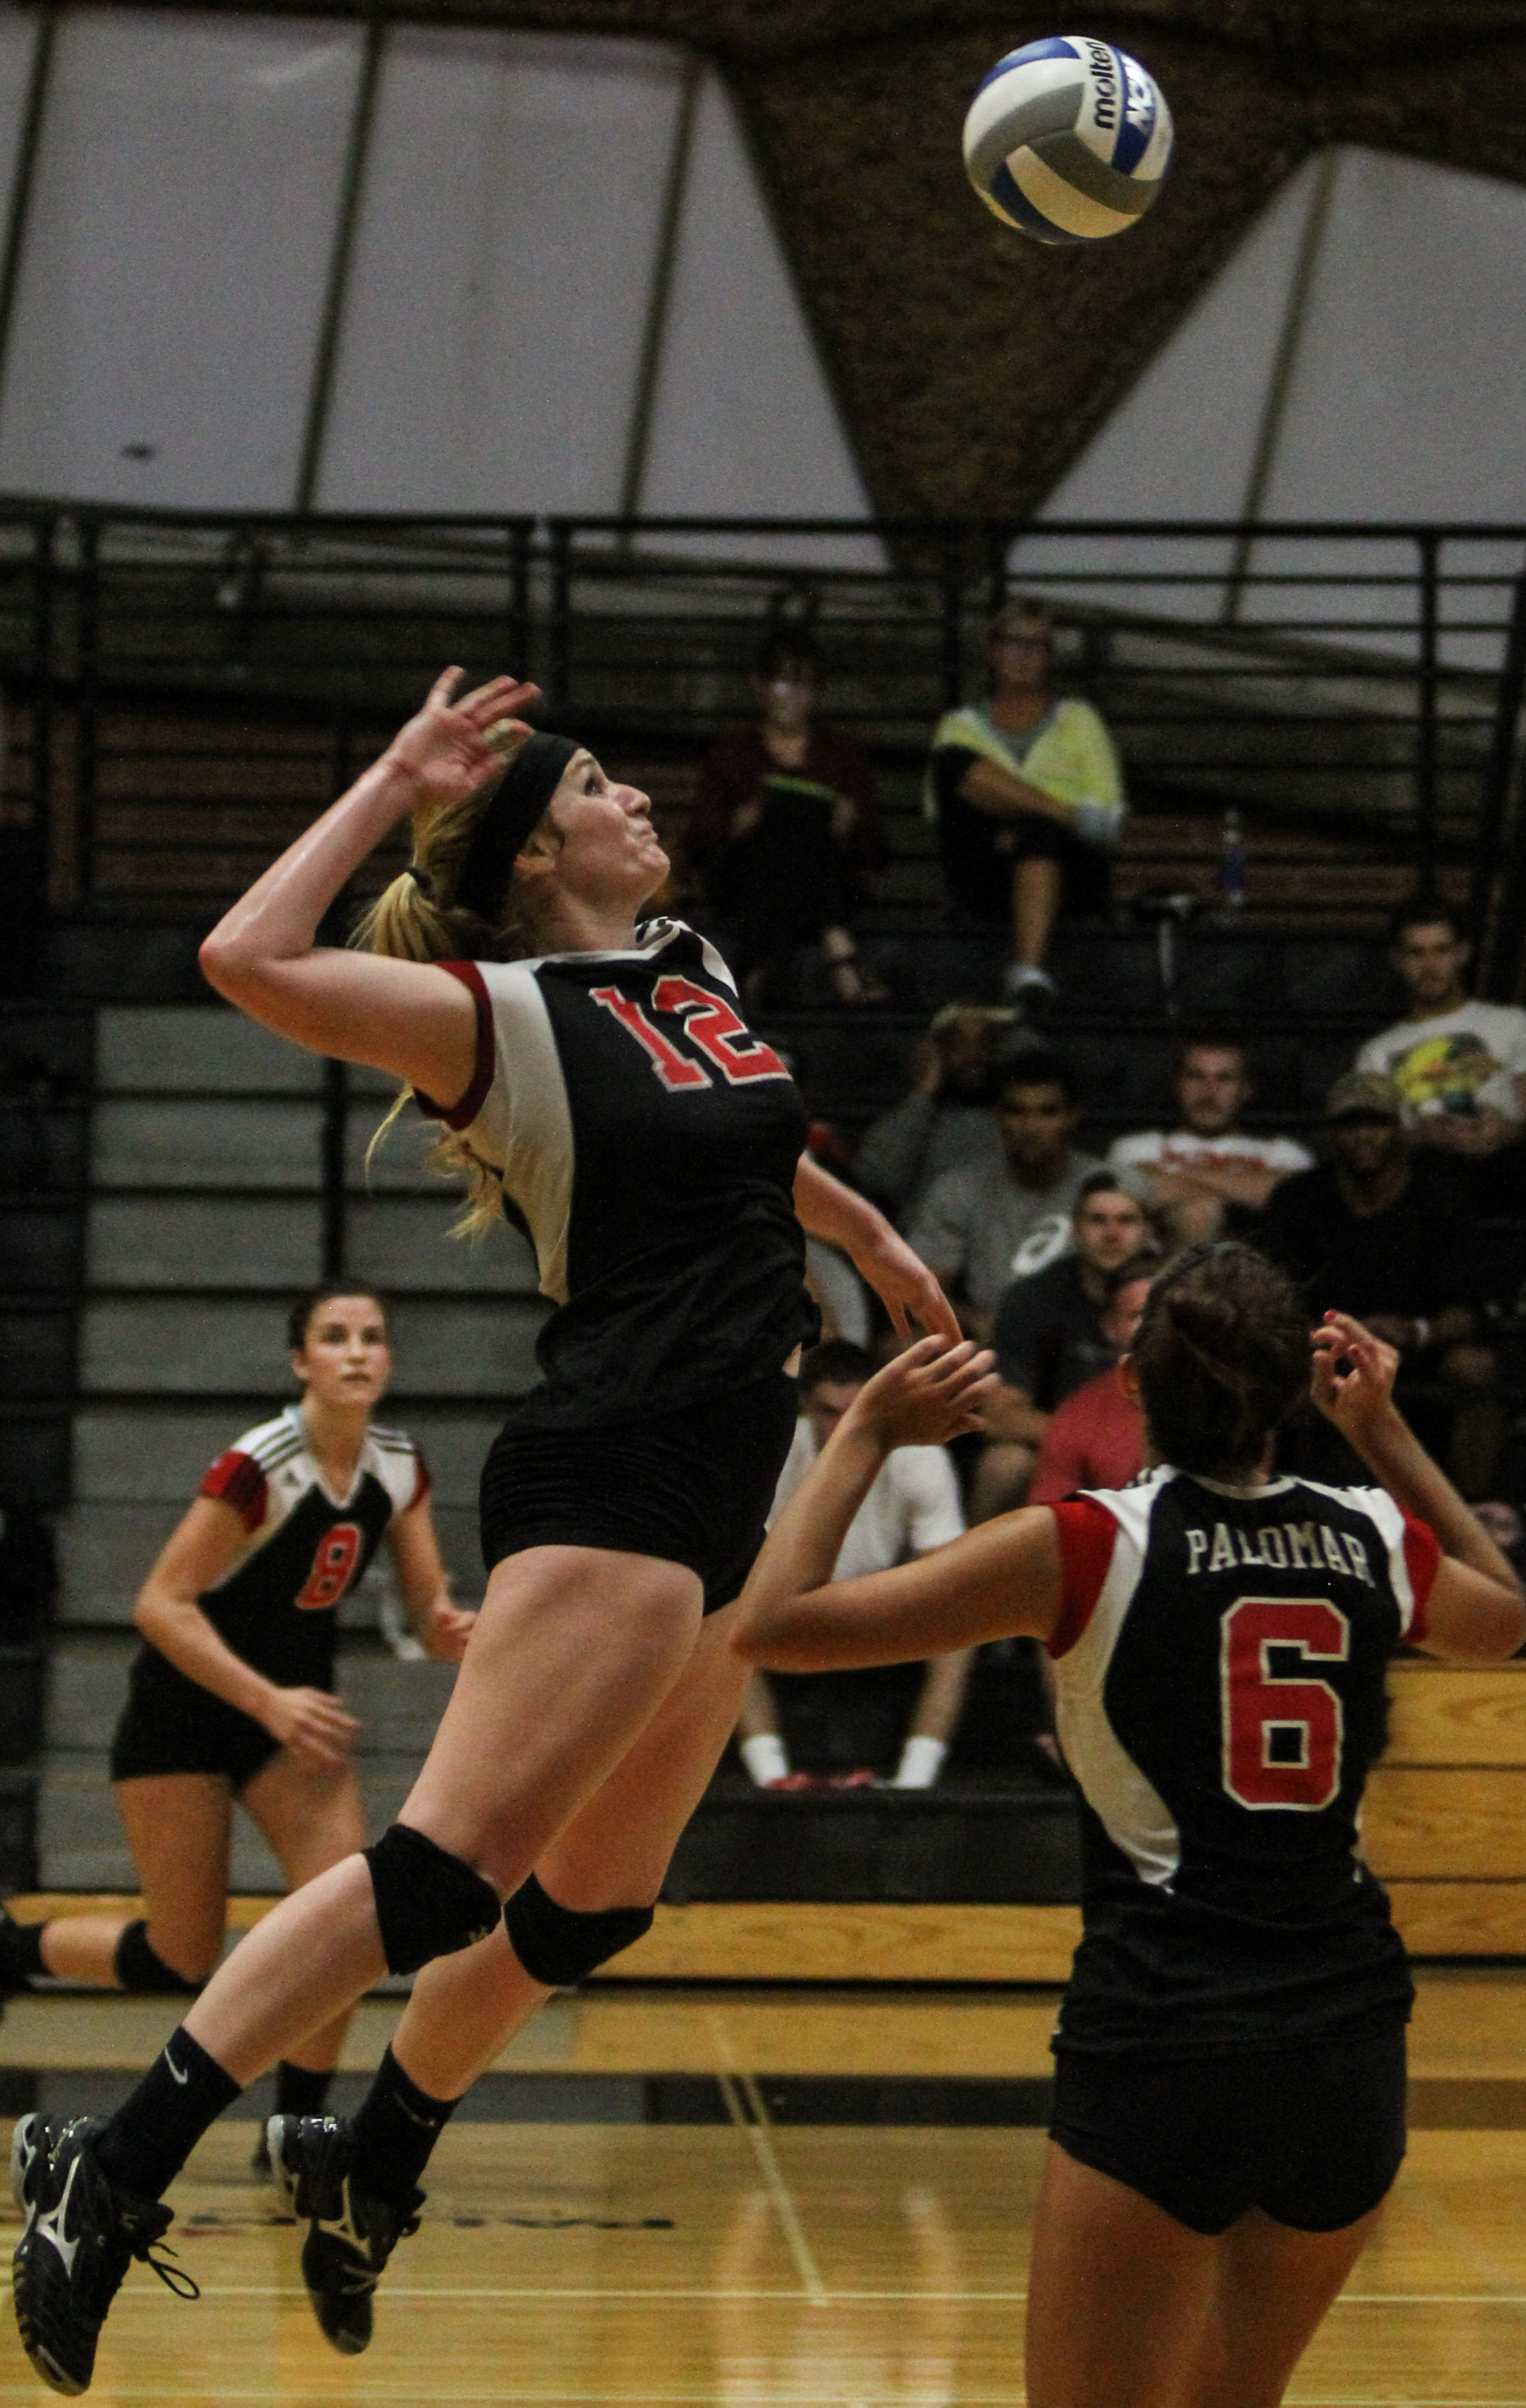 A female Palomar volleyball player leaps up to serve the ball with her right hand. A teammate stands near her on the right.